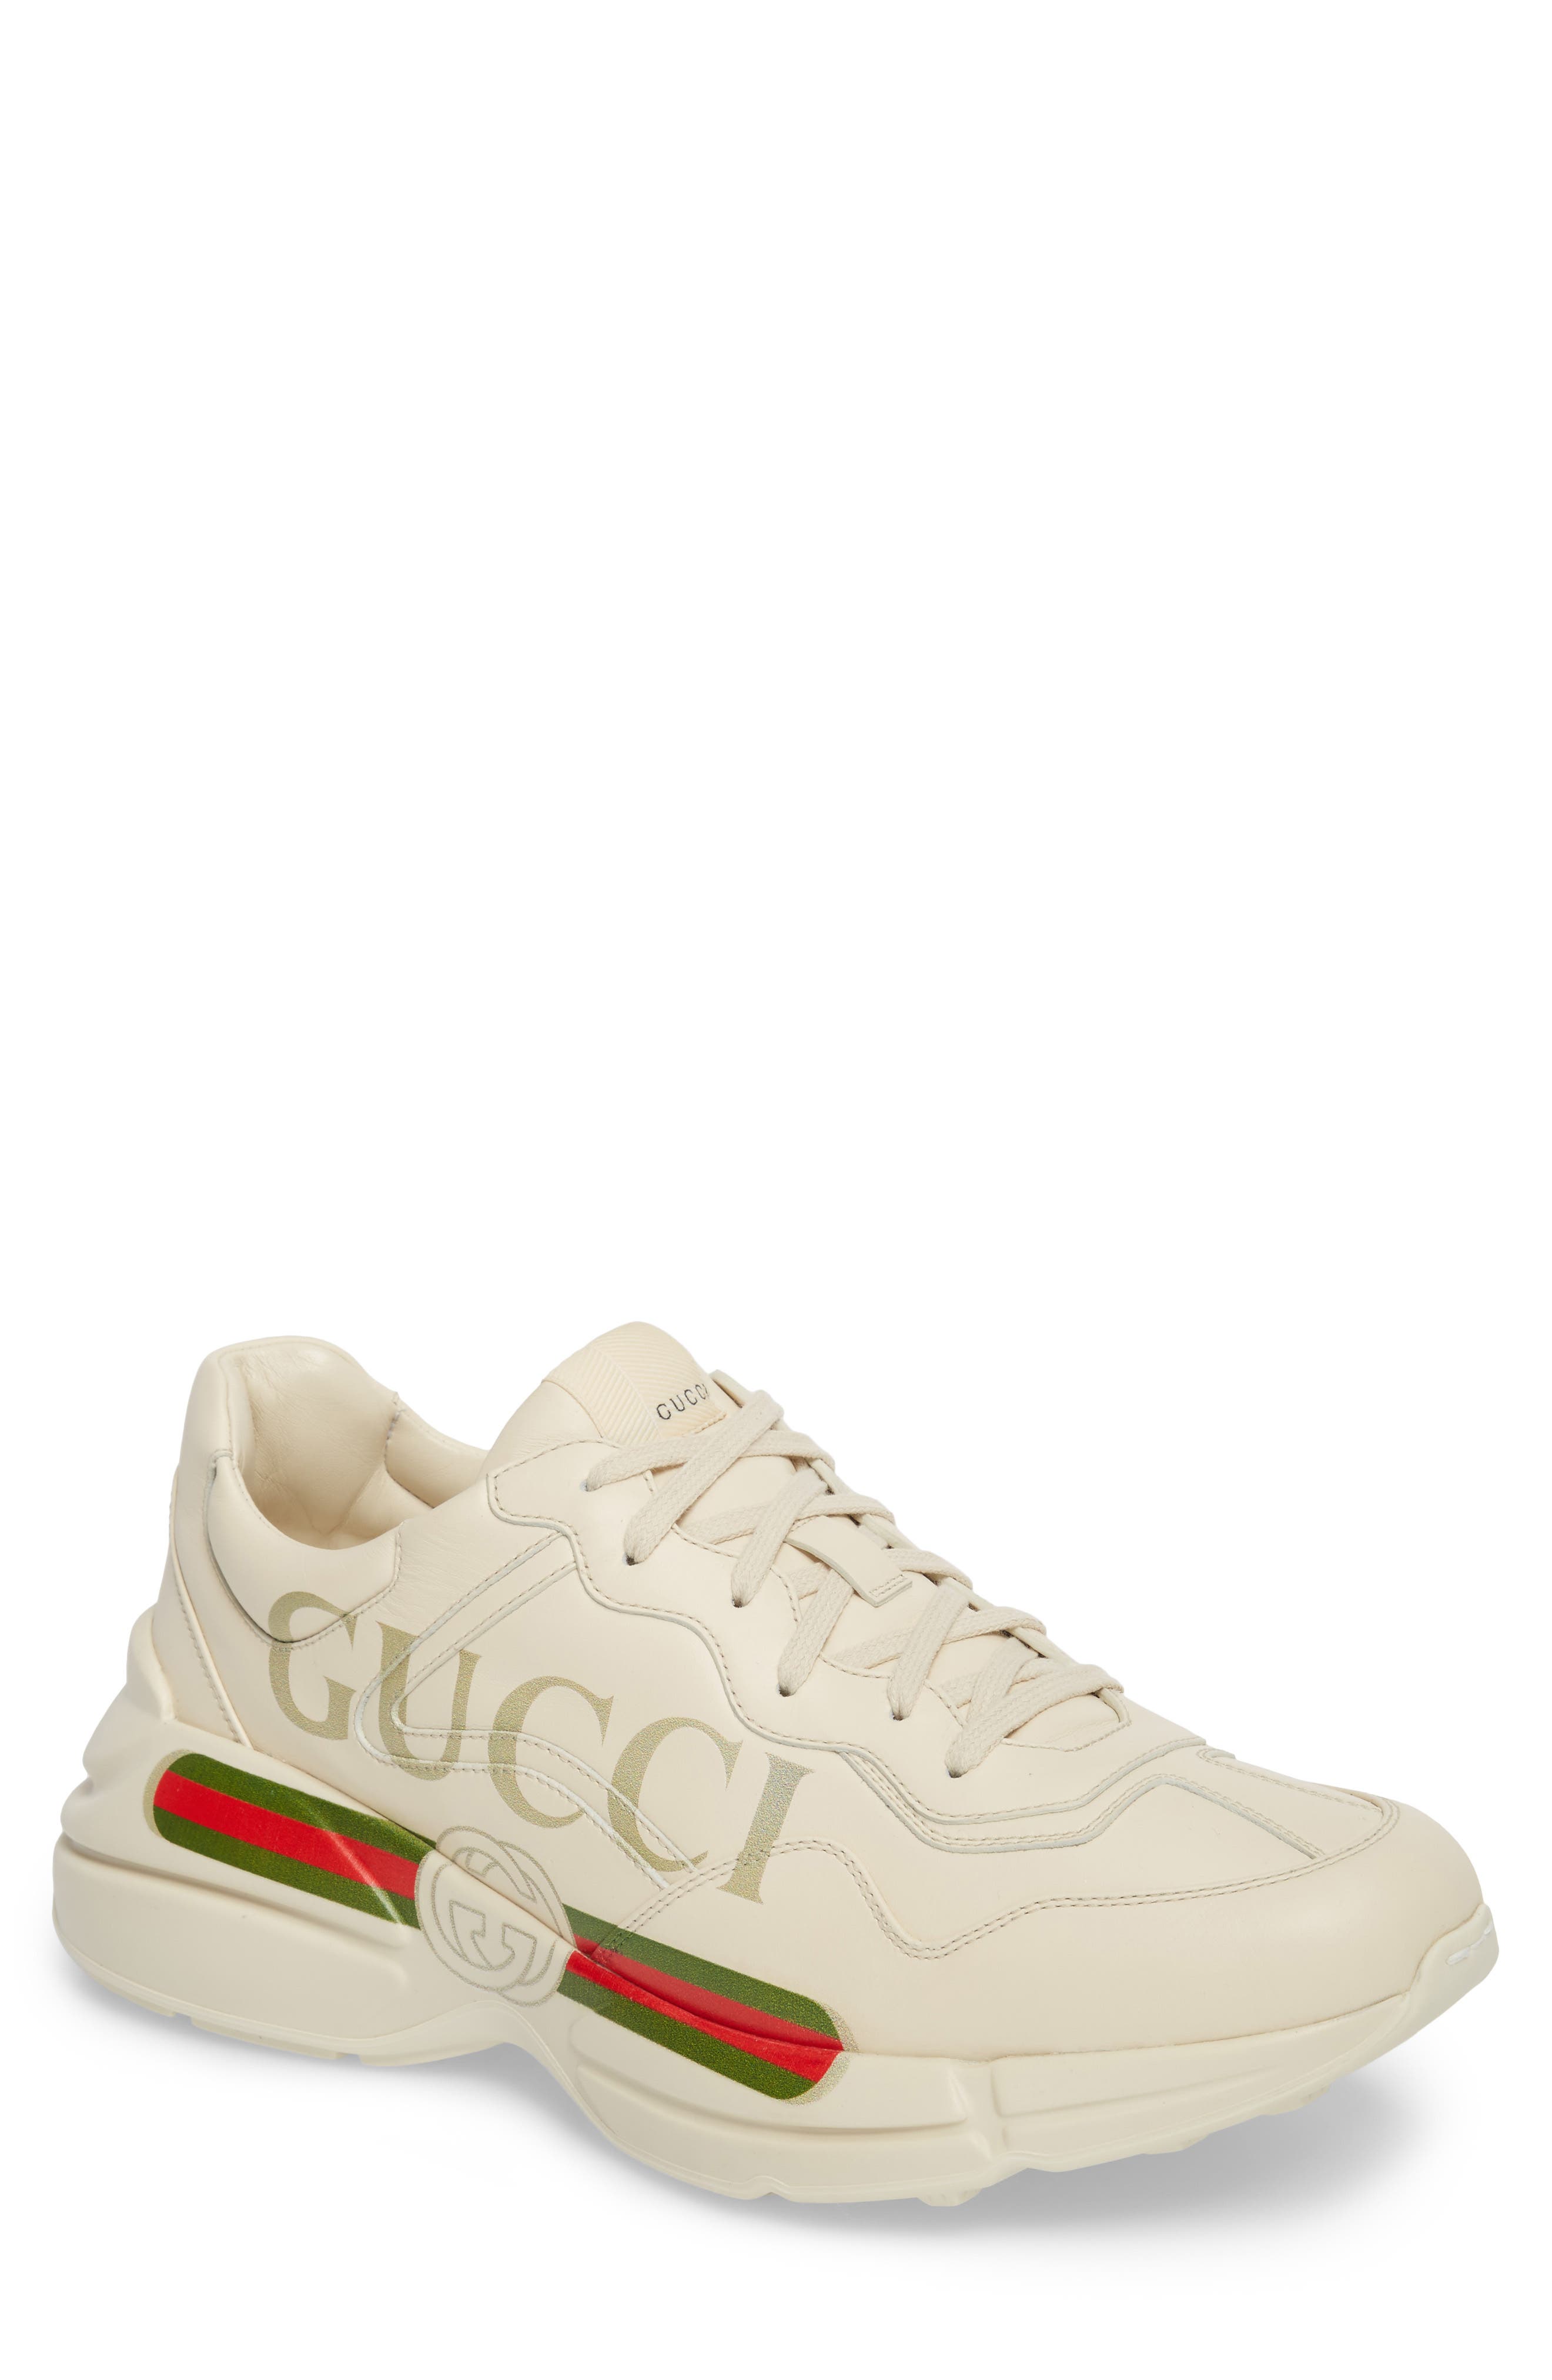 gucci mens sneakers white